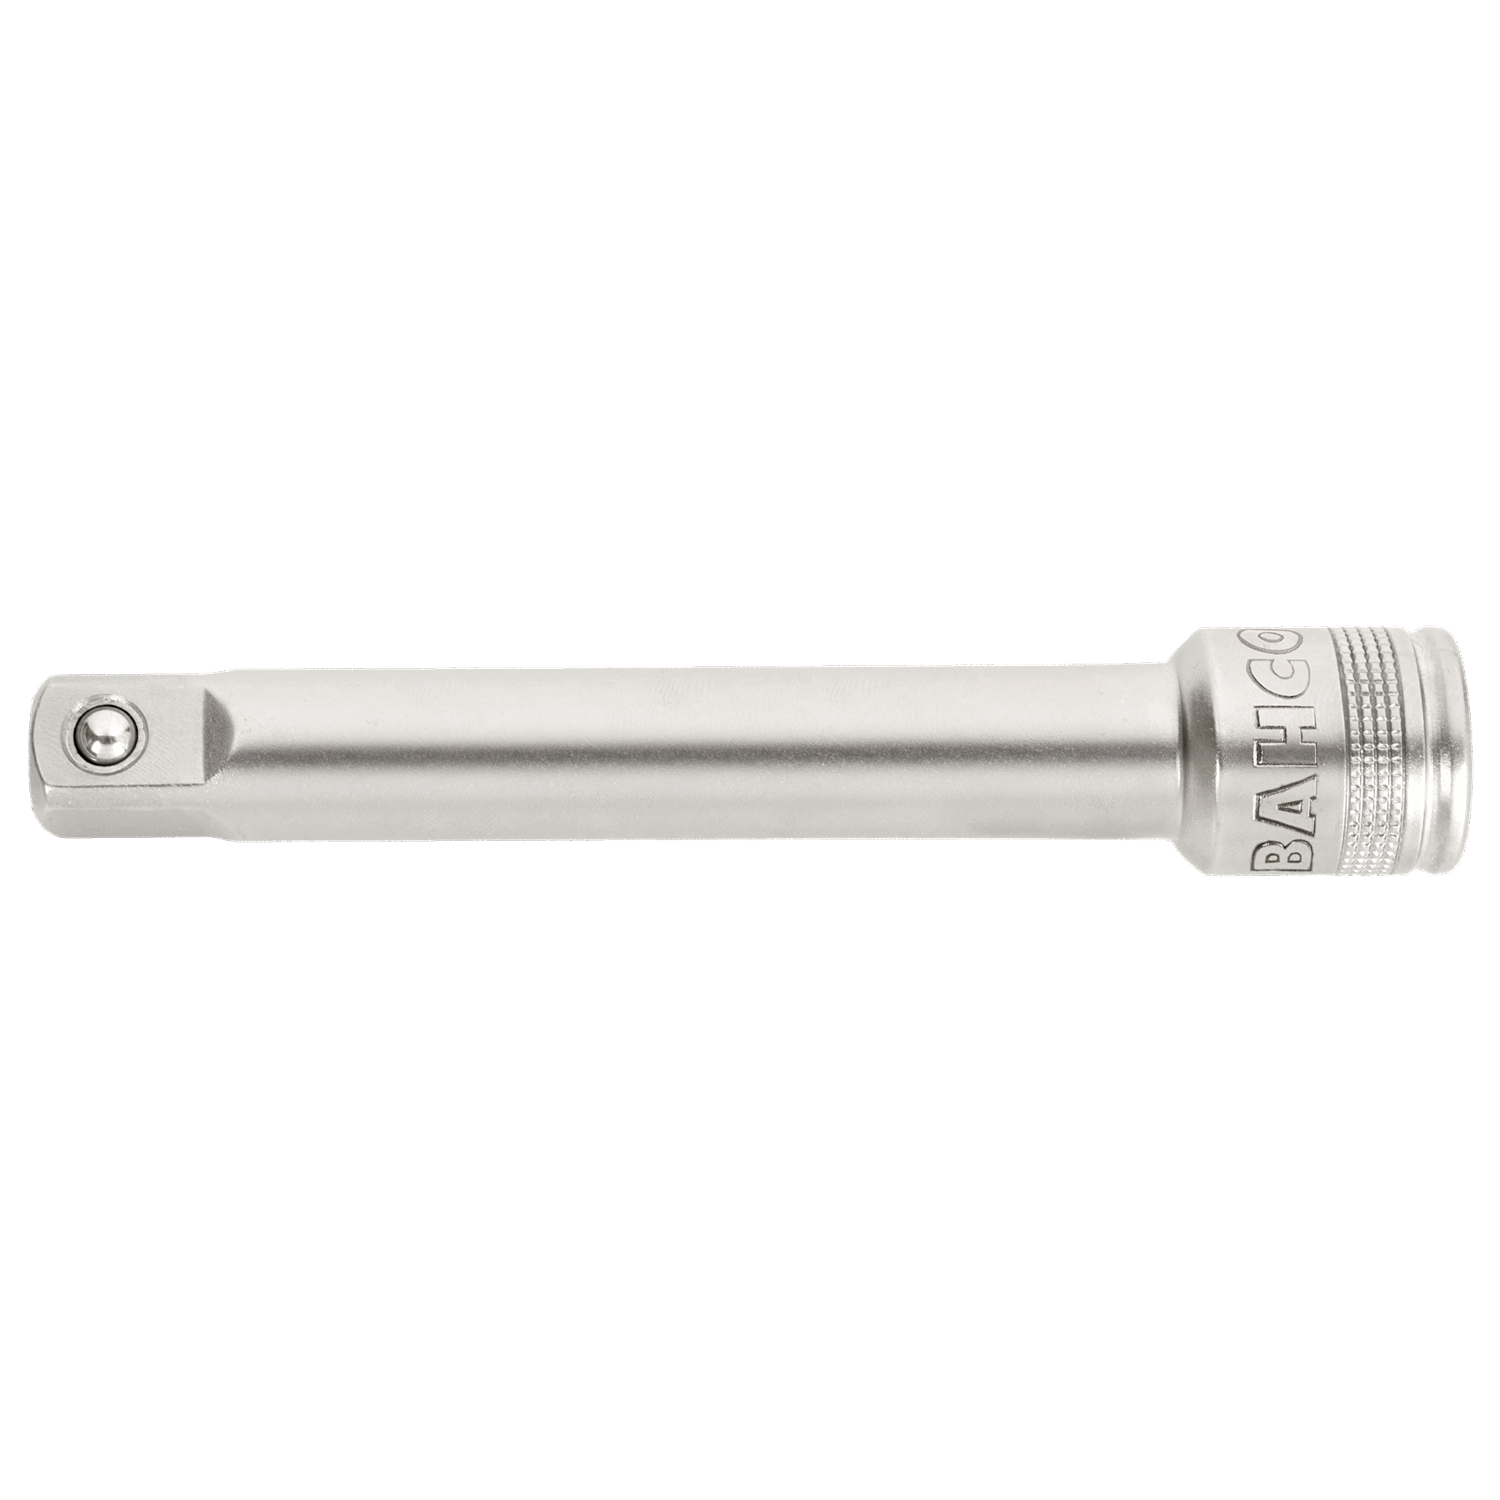 BAHCO 8160 1/2" Square Drive Extension Bar (BAHCO Tools) - Premium Extension Bar from BAHCO - Shop now at Yew Aik.